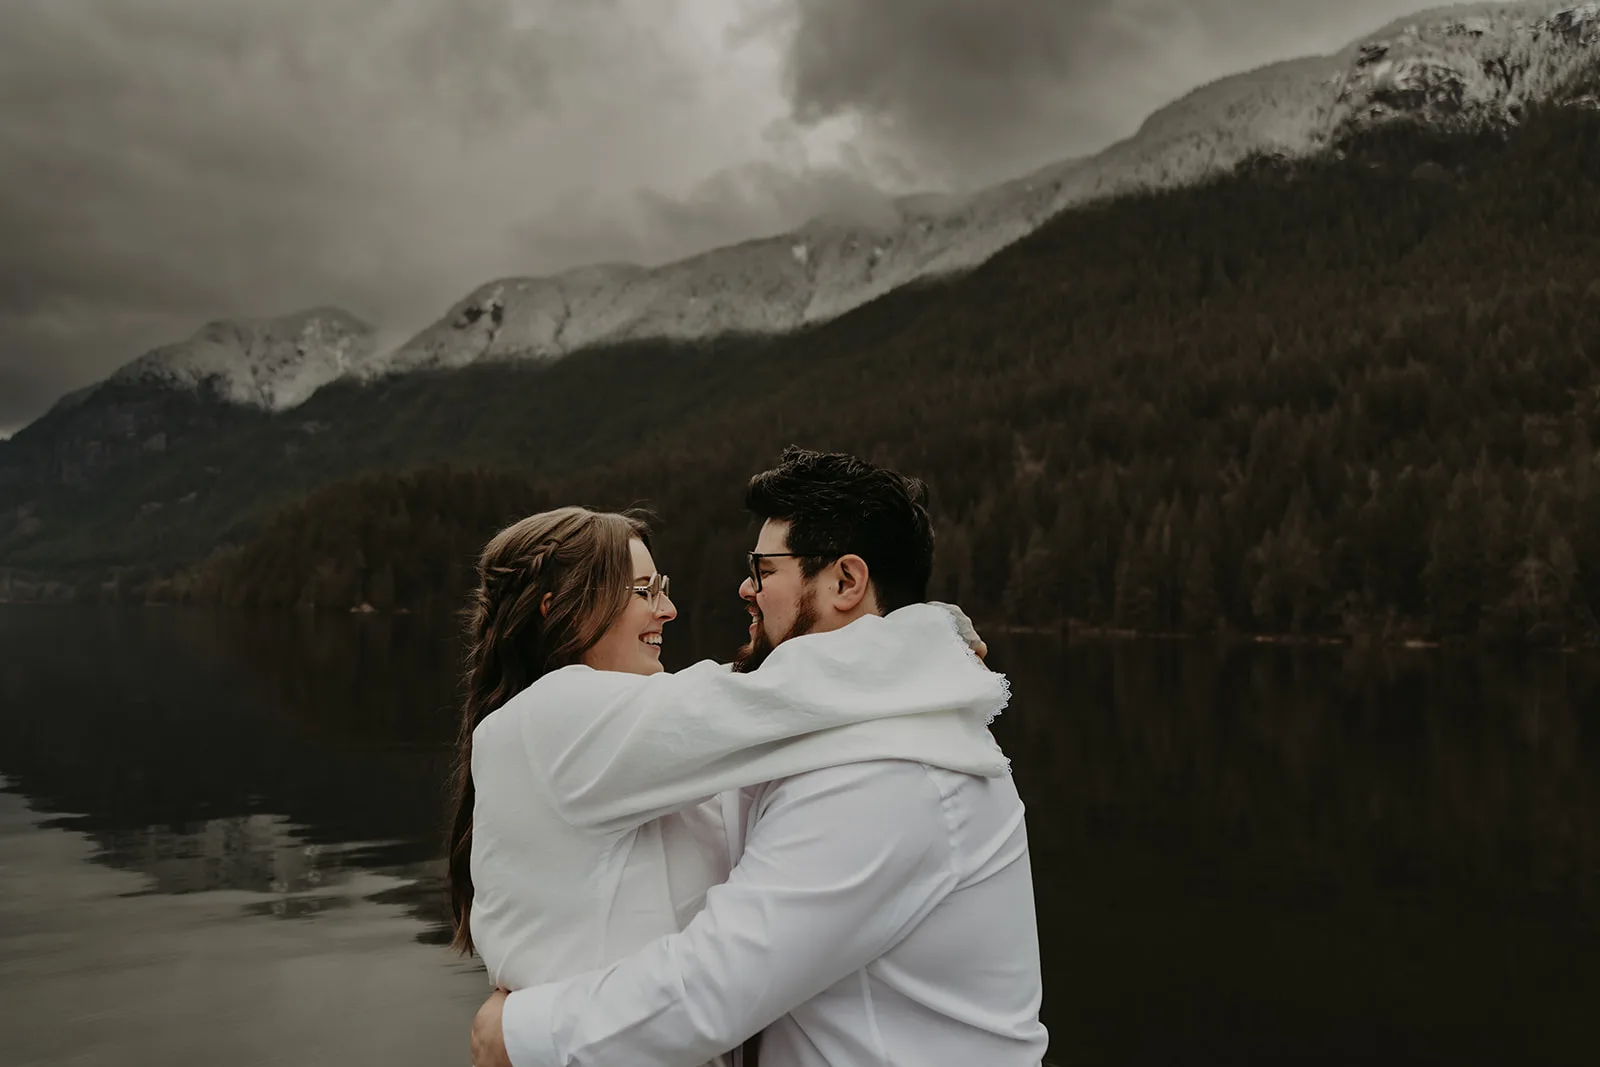 Newlywed couple embracing with mountains in the background behind them